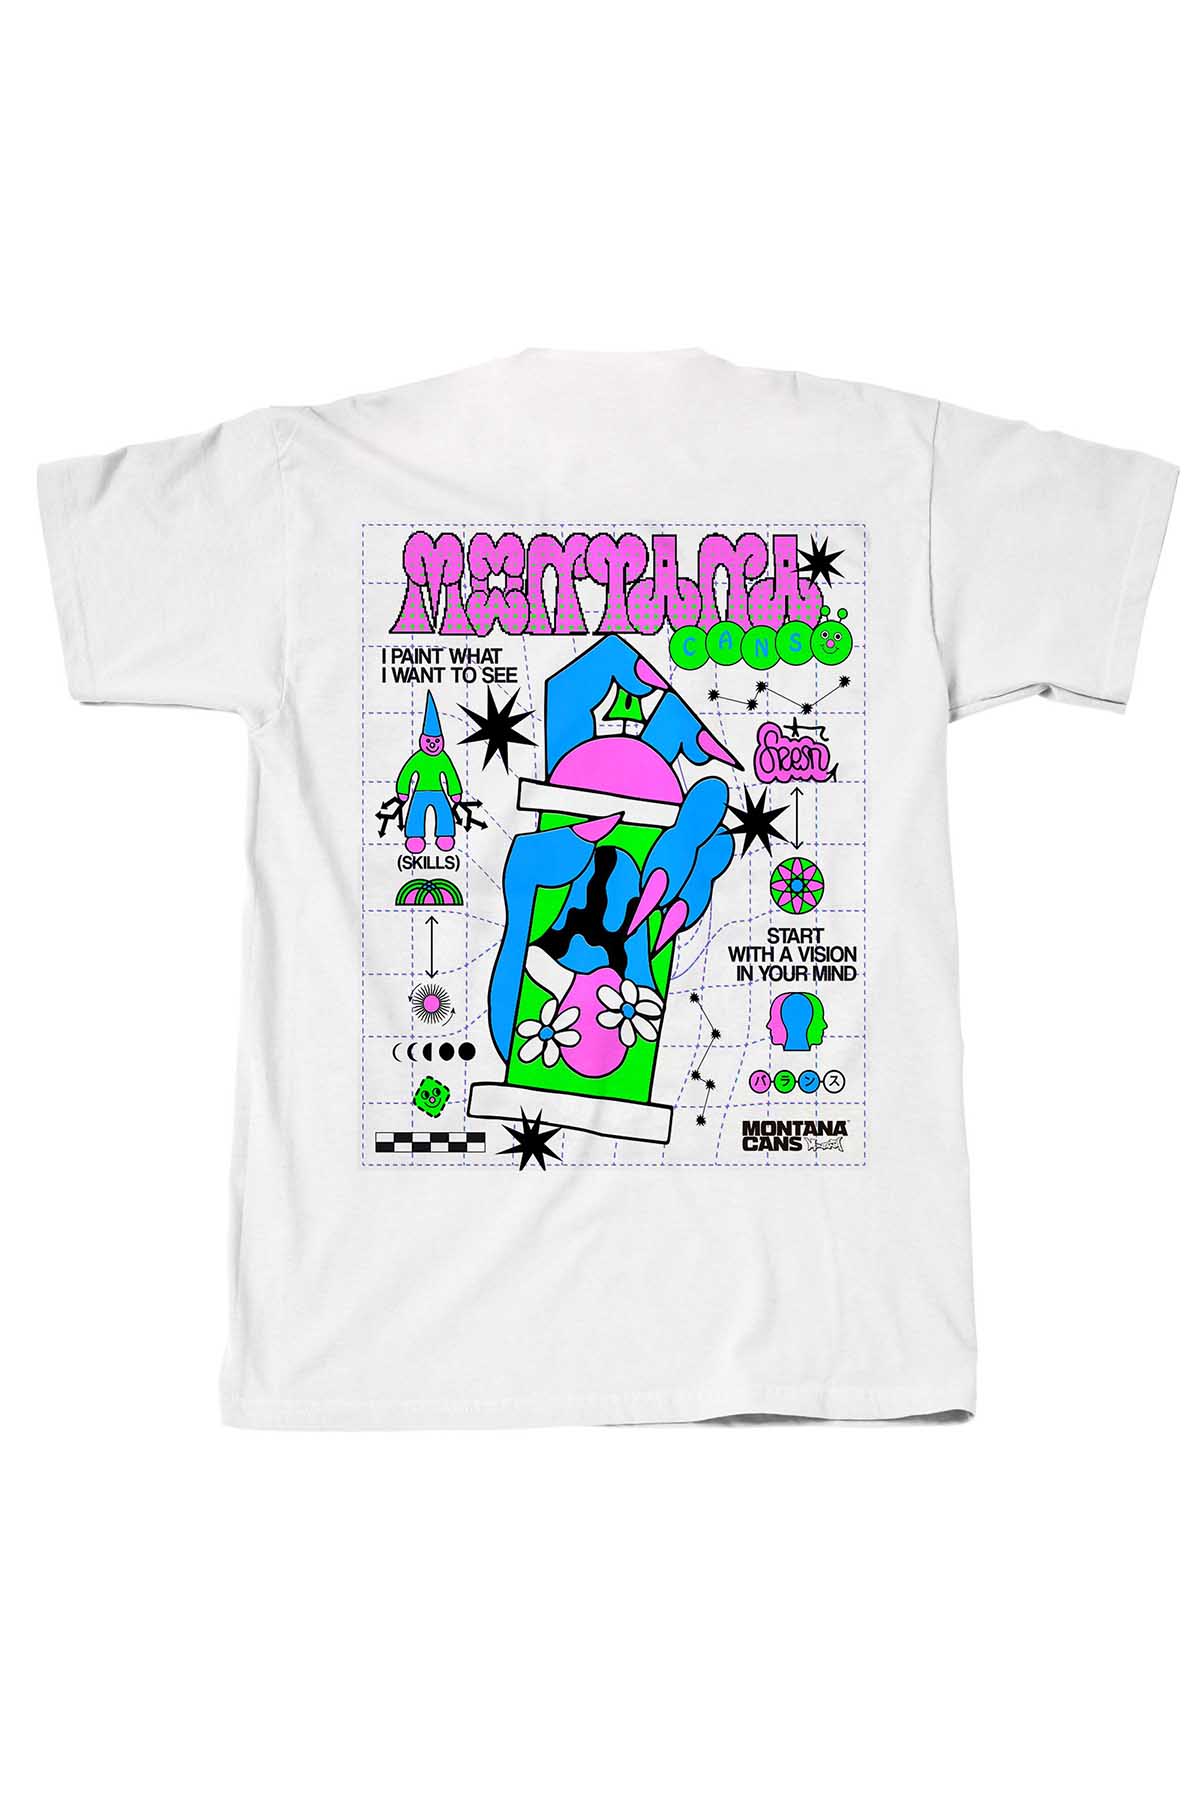 Montana I PAINT WHAT I WANT TO SEE T-Shirt by Fresh